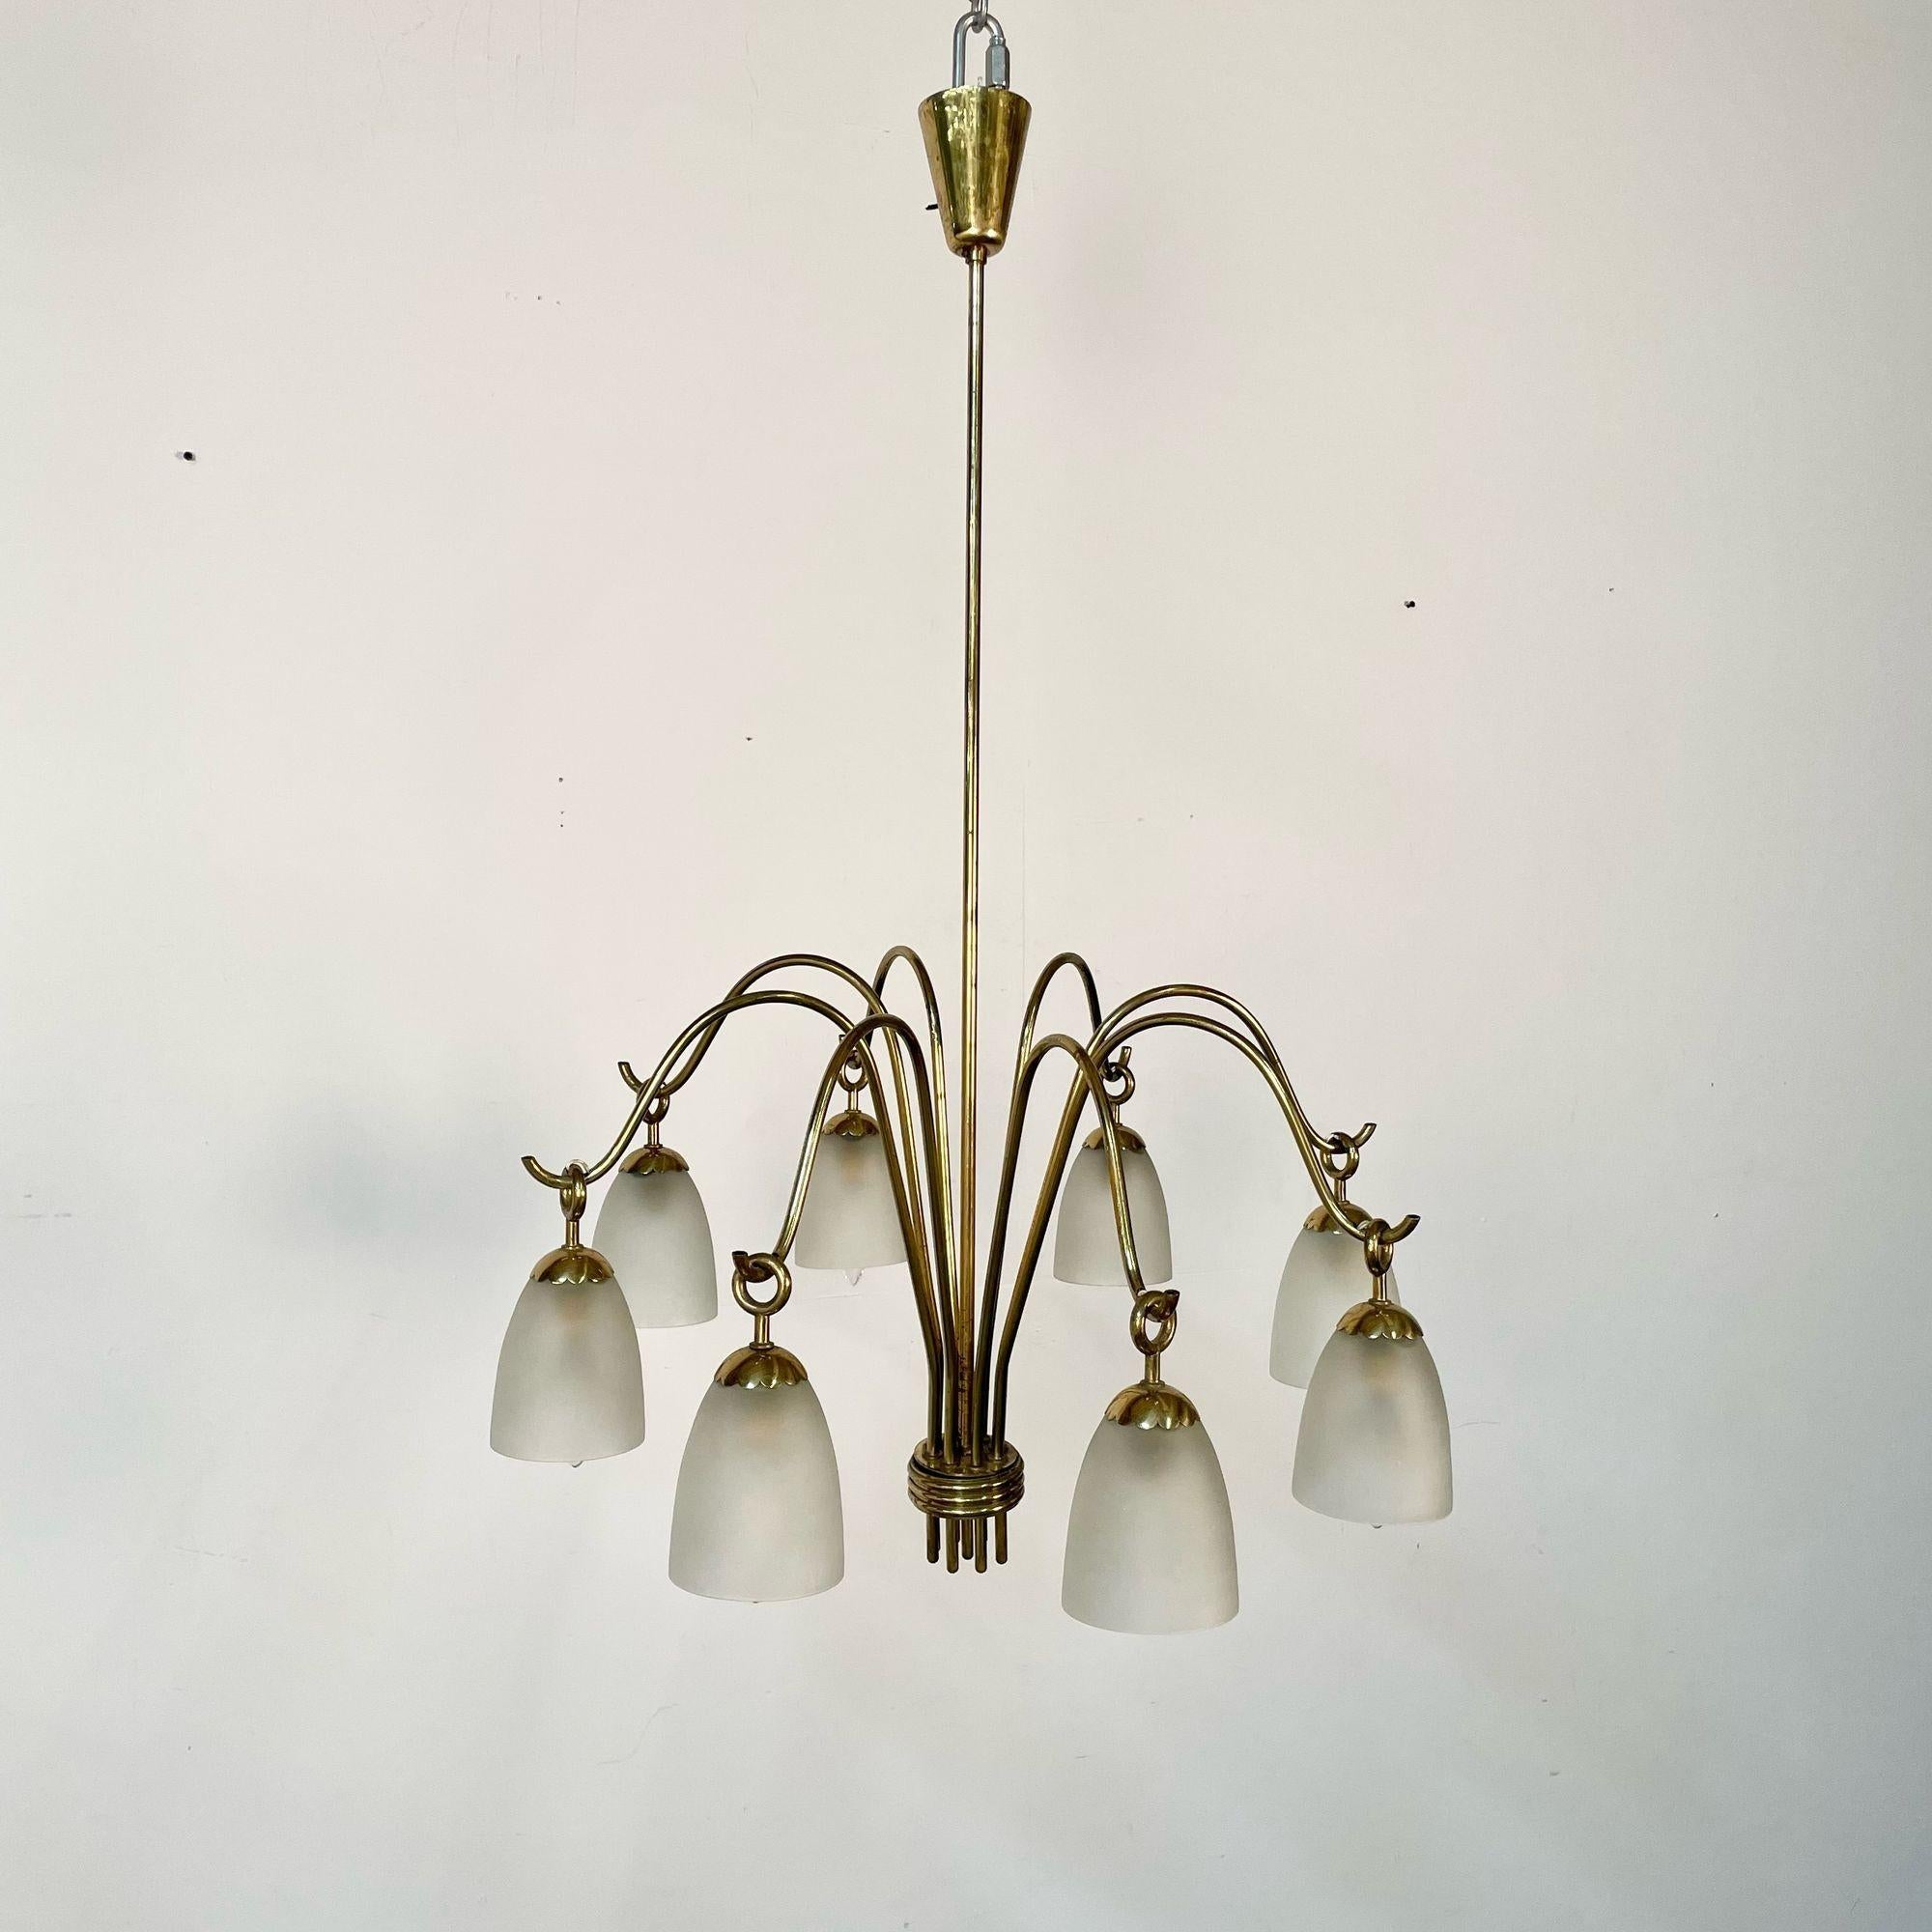 Italian Mid-Century Modern Arredoluce Eight Arm Brass Chandelier by Angelo Lelli In Good Condition For Sale In Stamford, CT